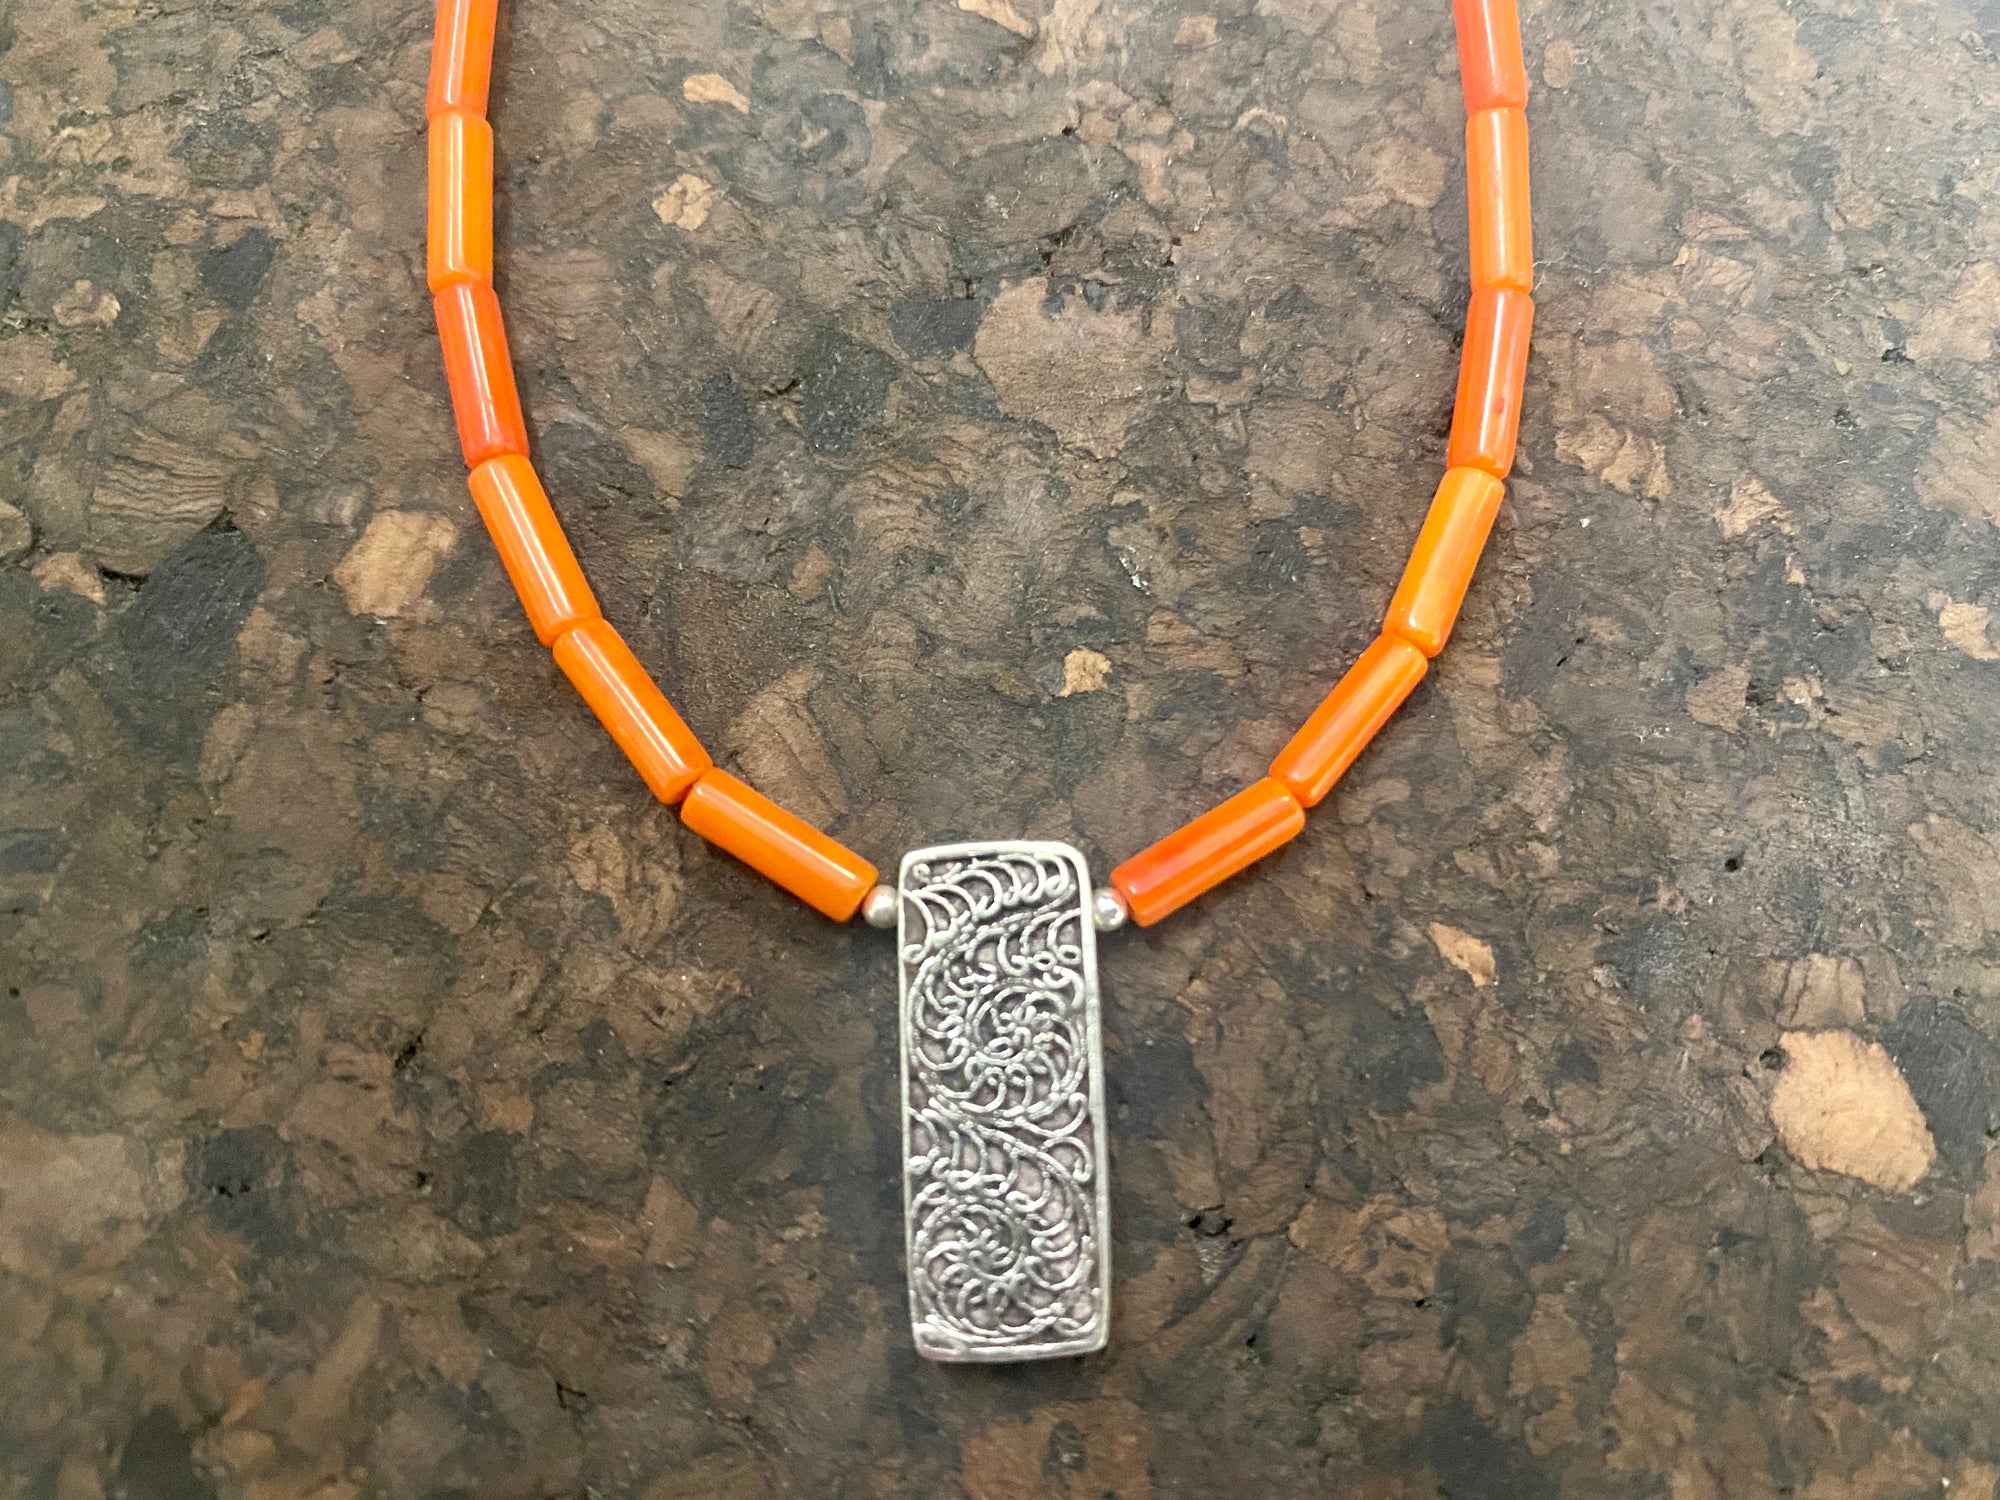 Orange-red coral necklace with sterling silver filigree pendant. Finished with l silver hook clasp. Length 45 cm